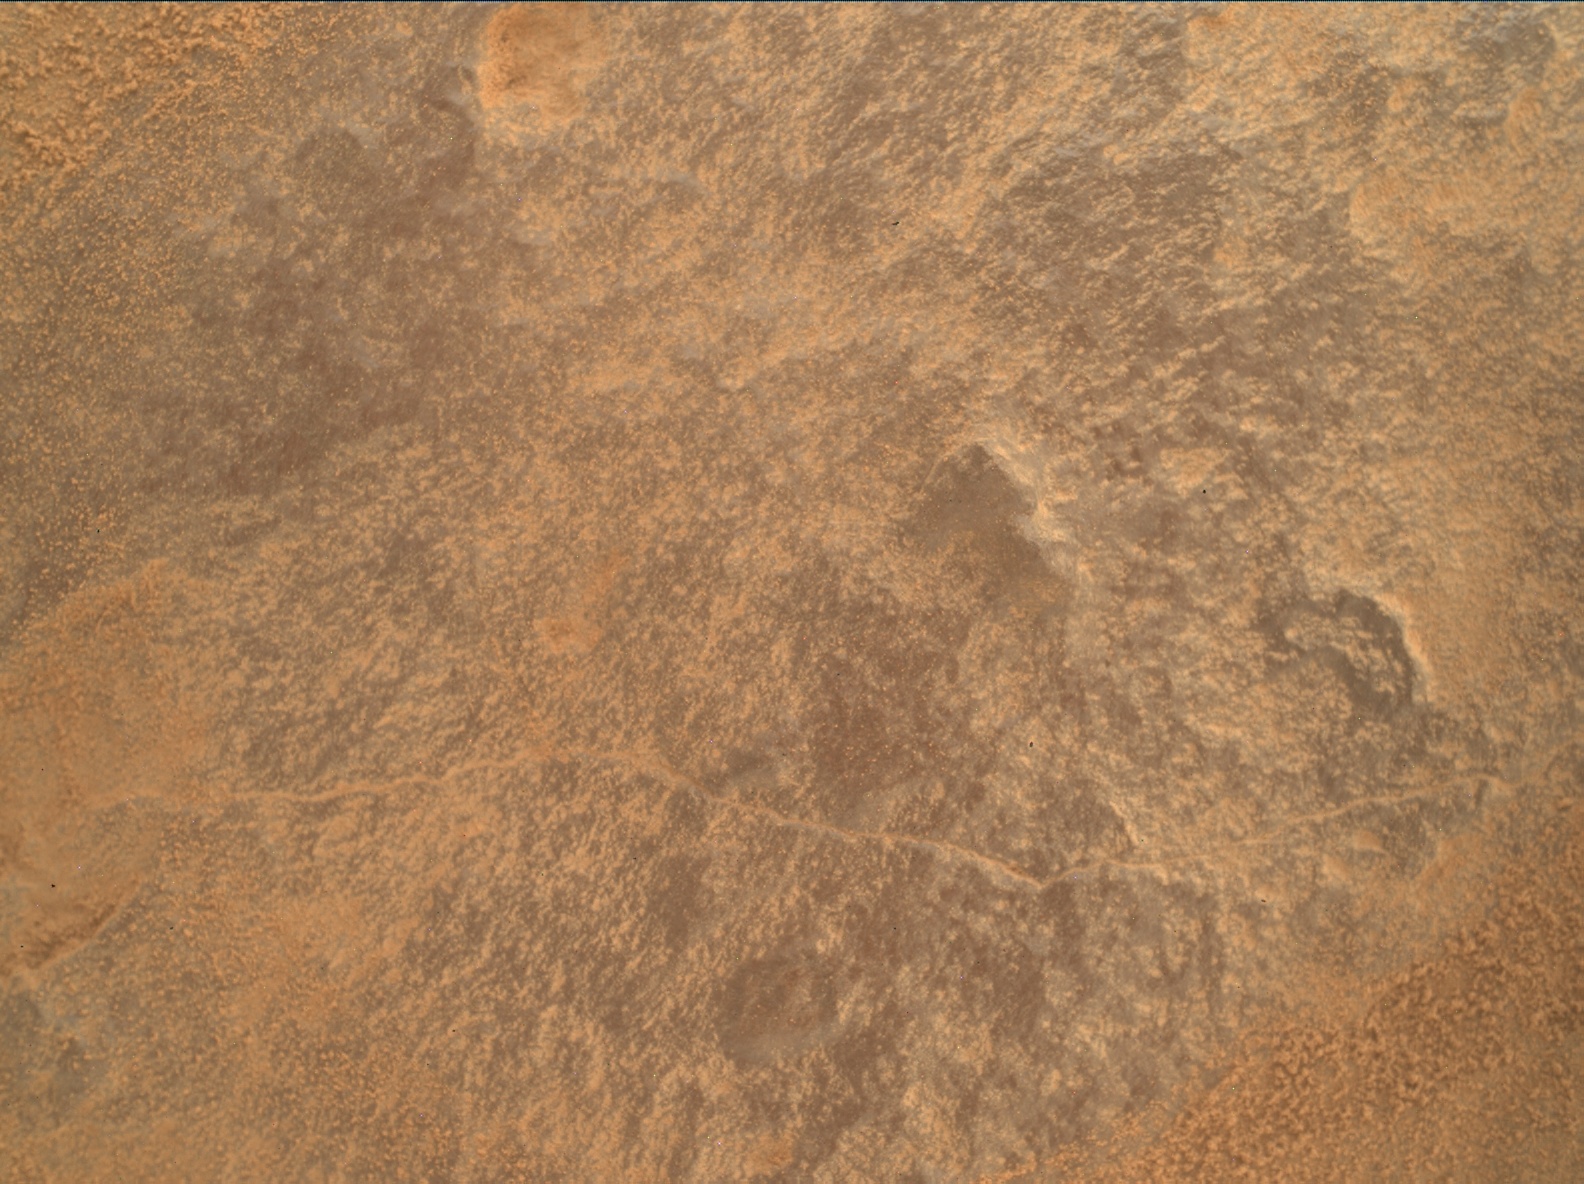 Nasa's Mars rover Curiosity acquired this image using its Mars Hand Lens Imager (MAHLI) on Sol 3739